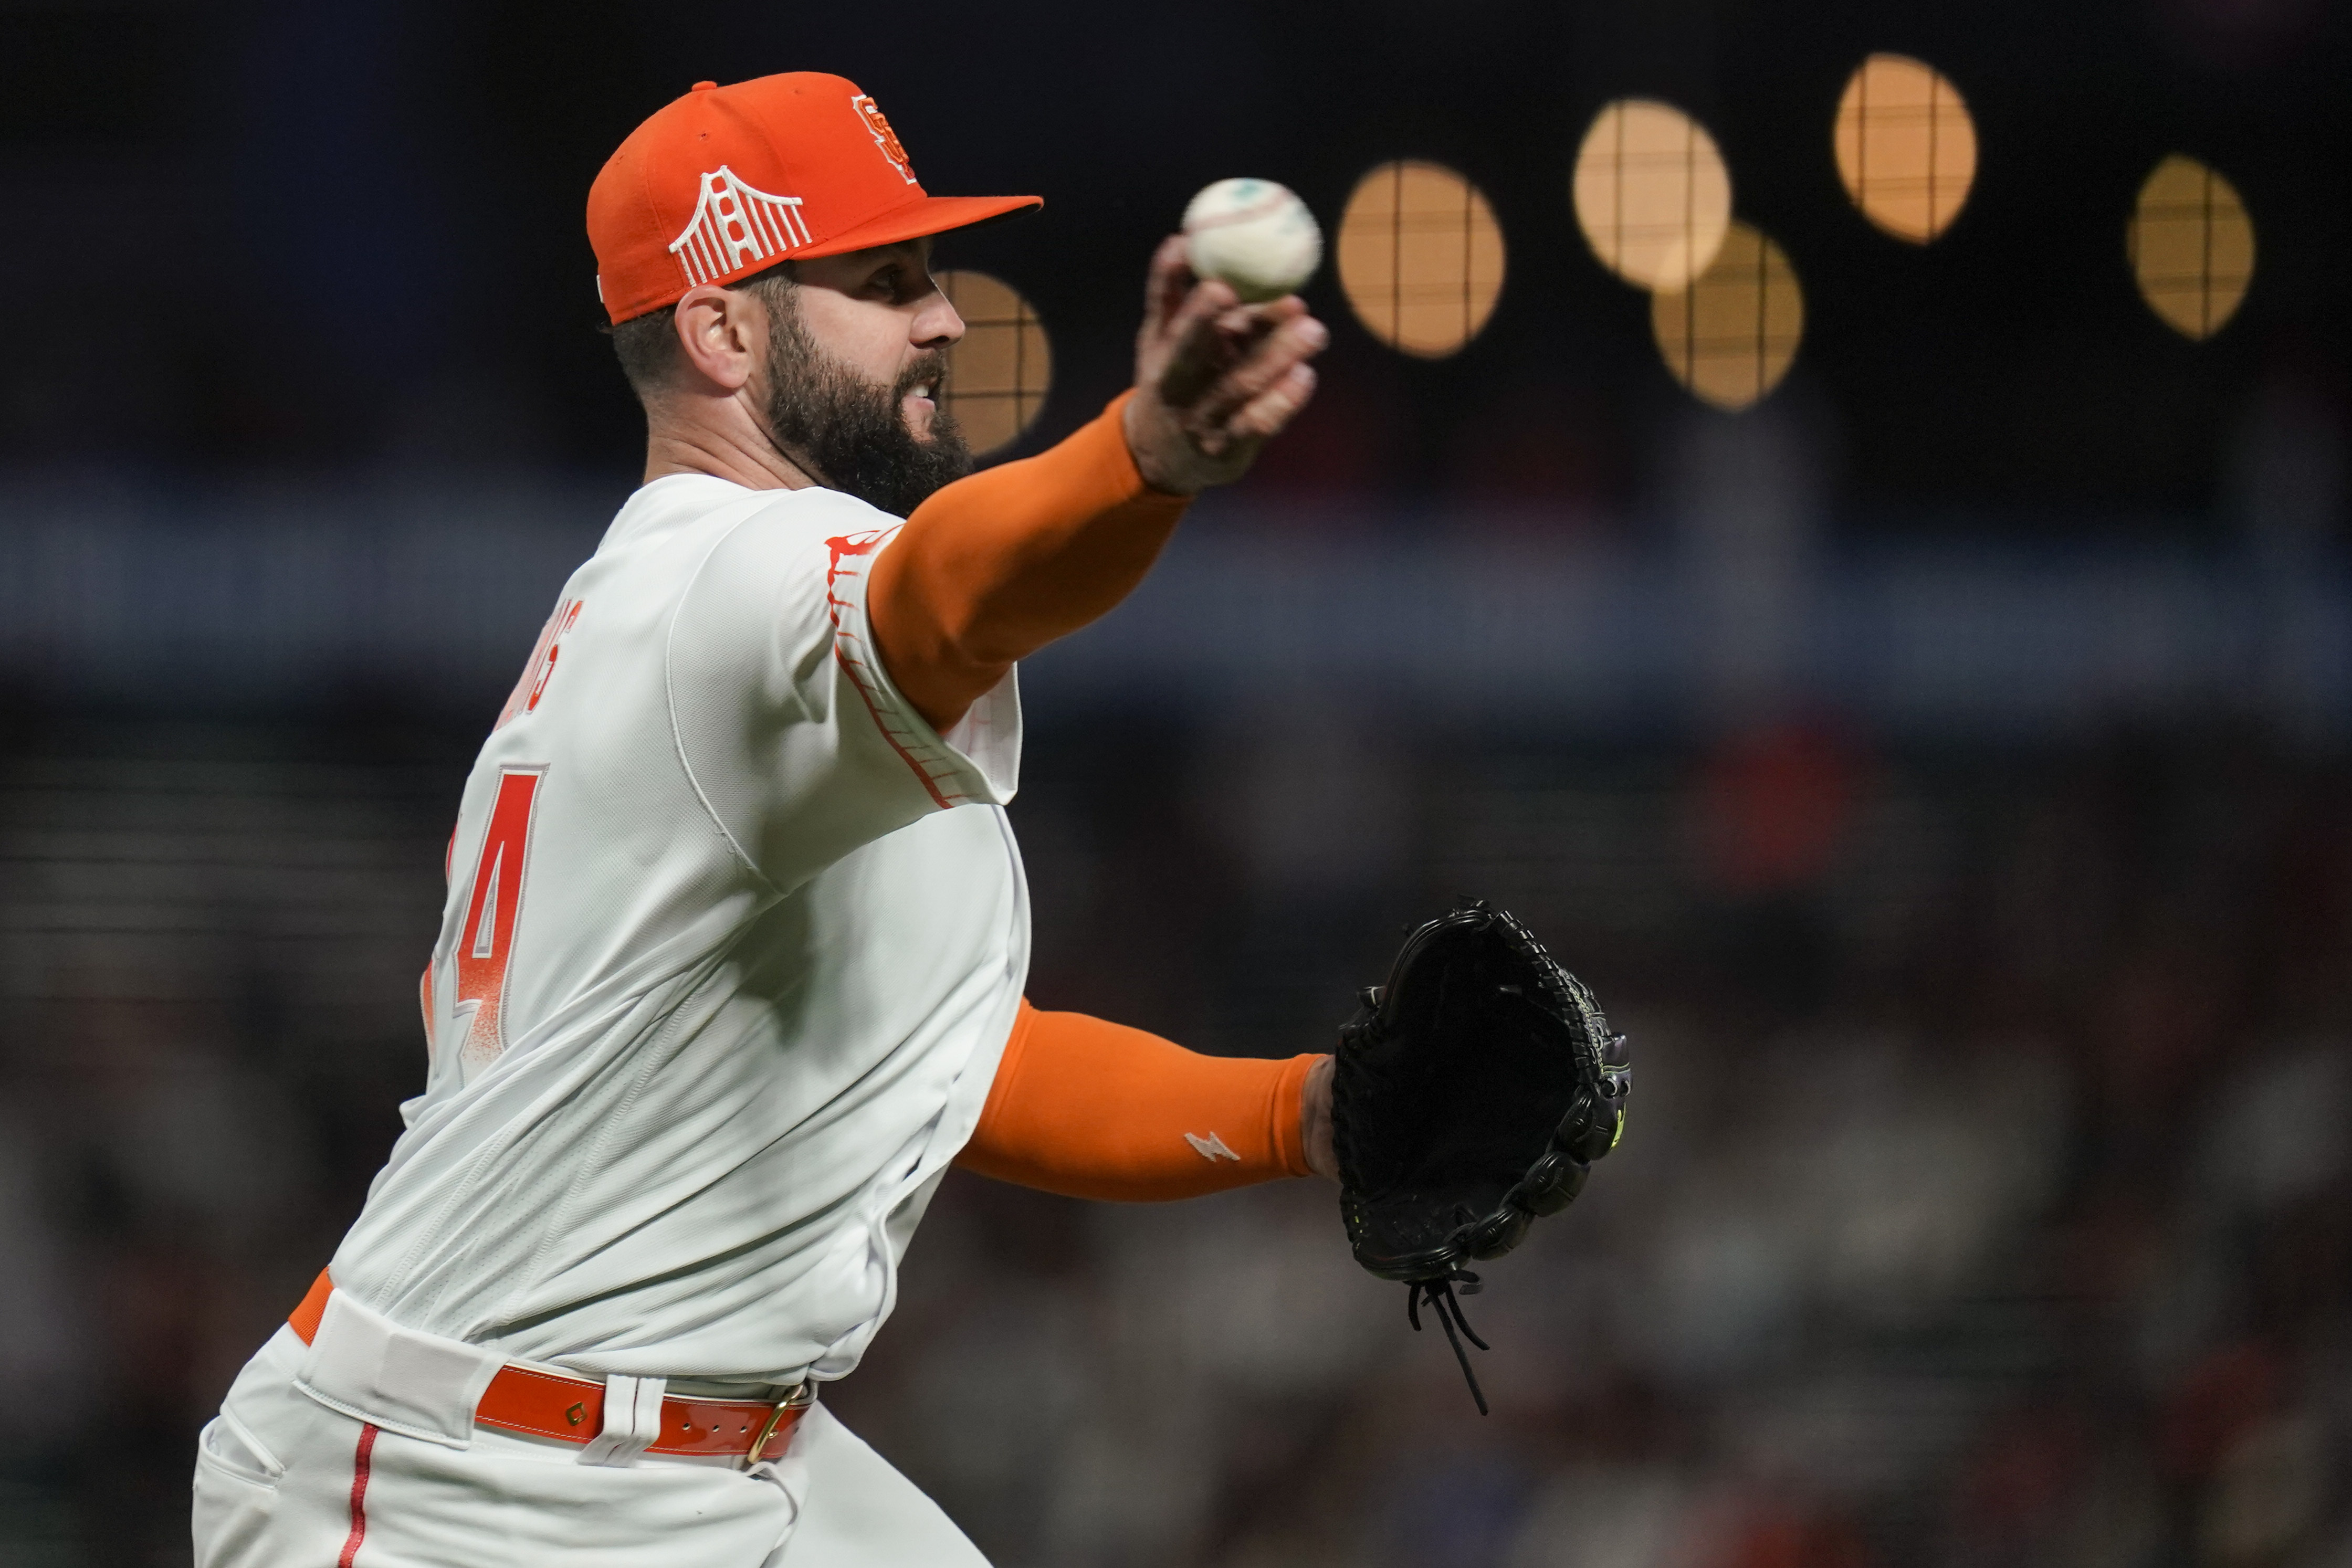 SF Giants HQ: First half presents case for Giants to keep Posey, Crawford,  Belt trio together beyond 2021 – Daily Democrat